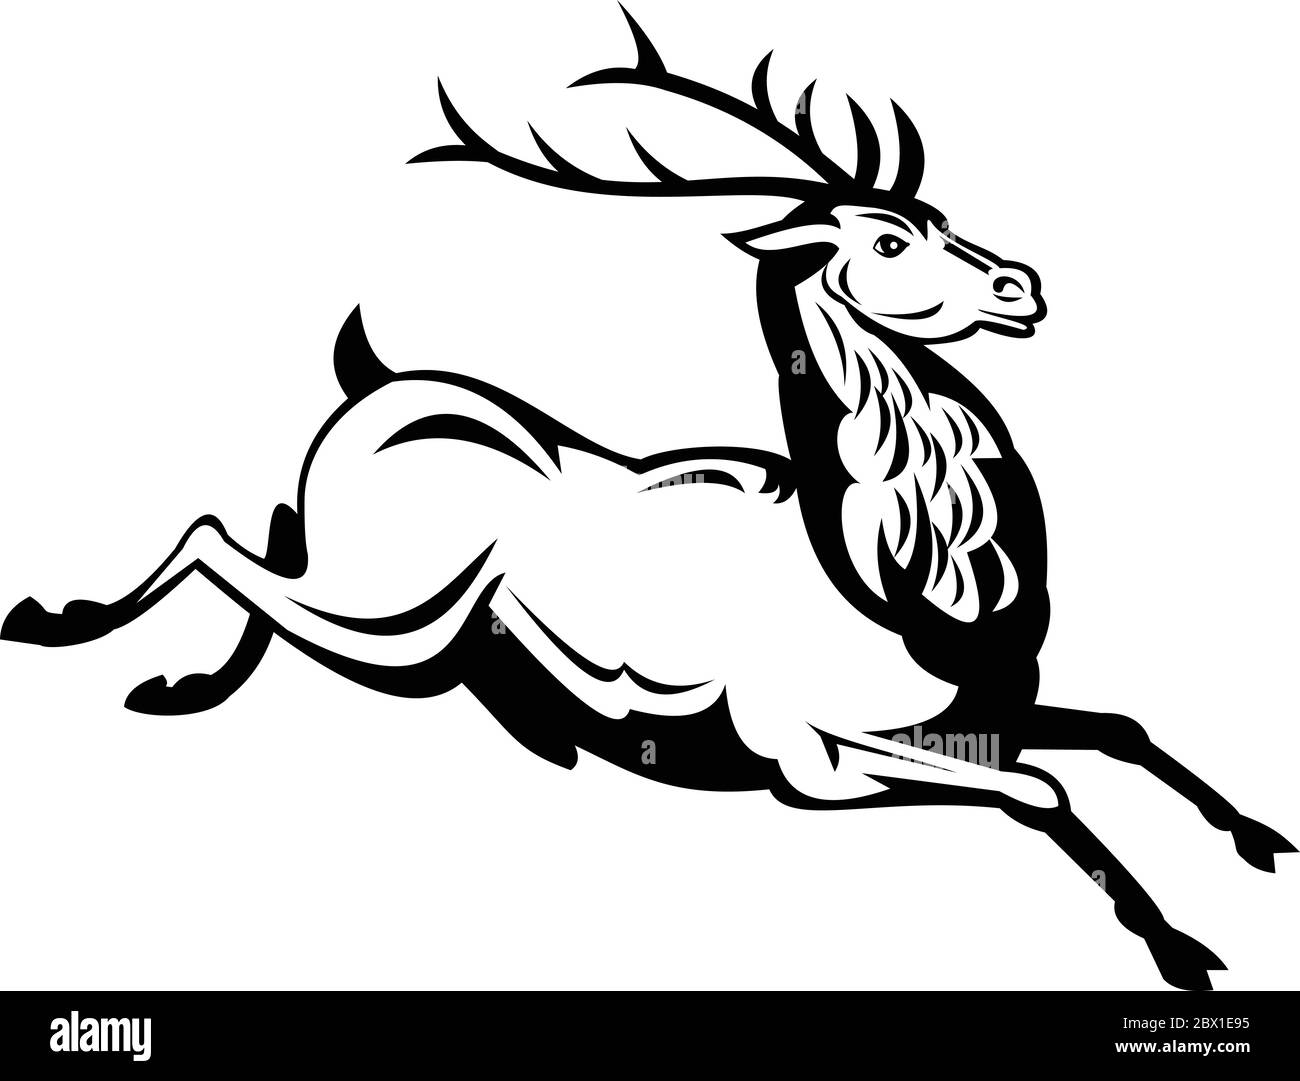 Retro style illustration of a red deer stag (Cervus elaphus), one of the largest deer species, running and jumping viewed from side on isolated backgr Stock Vector